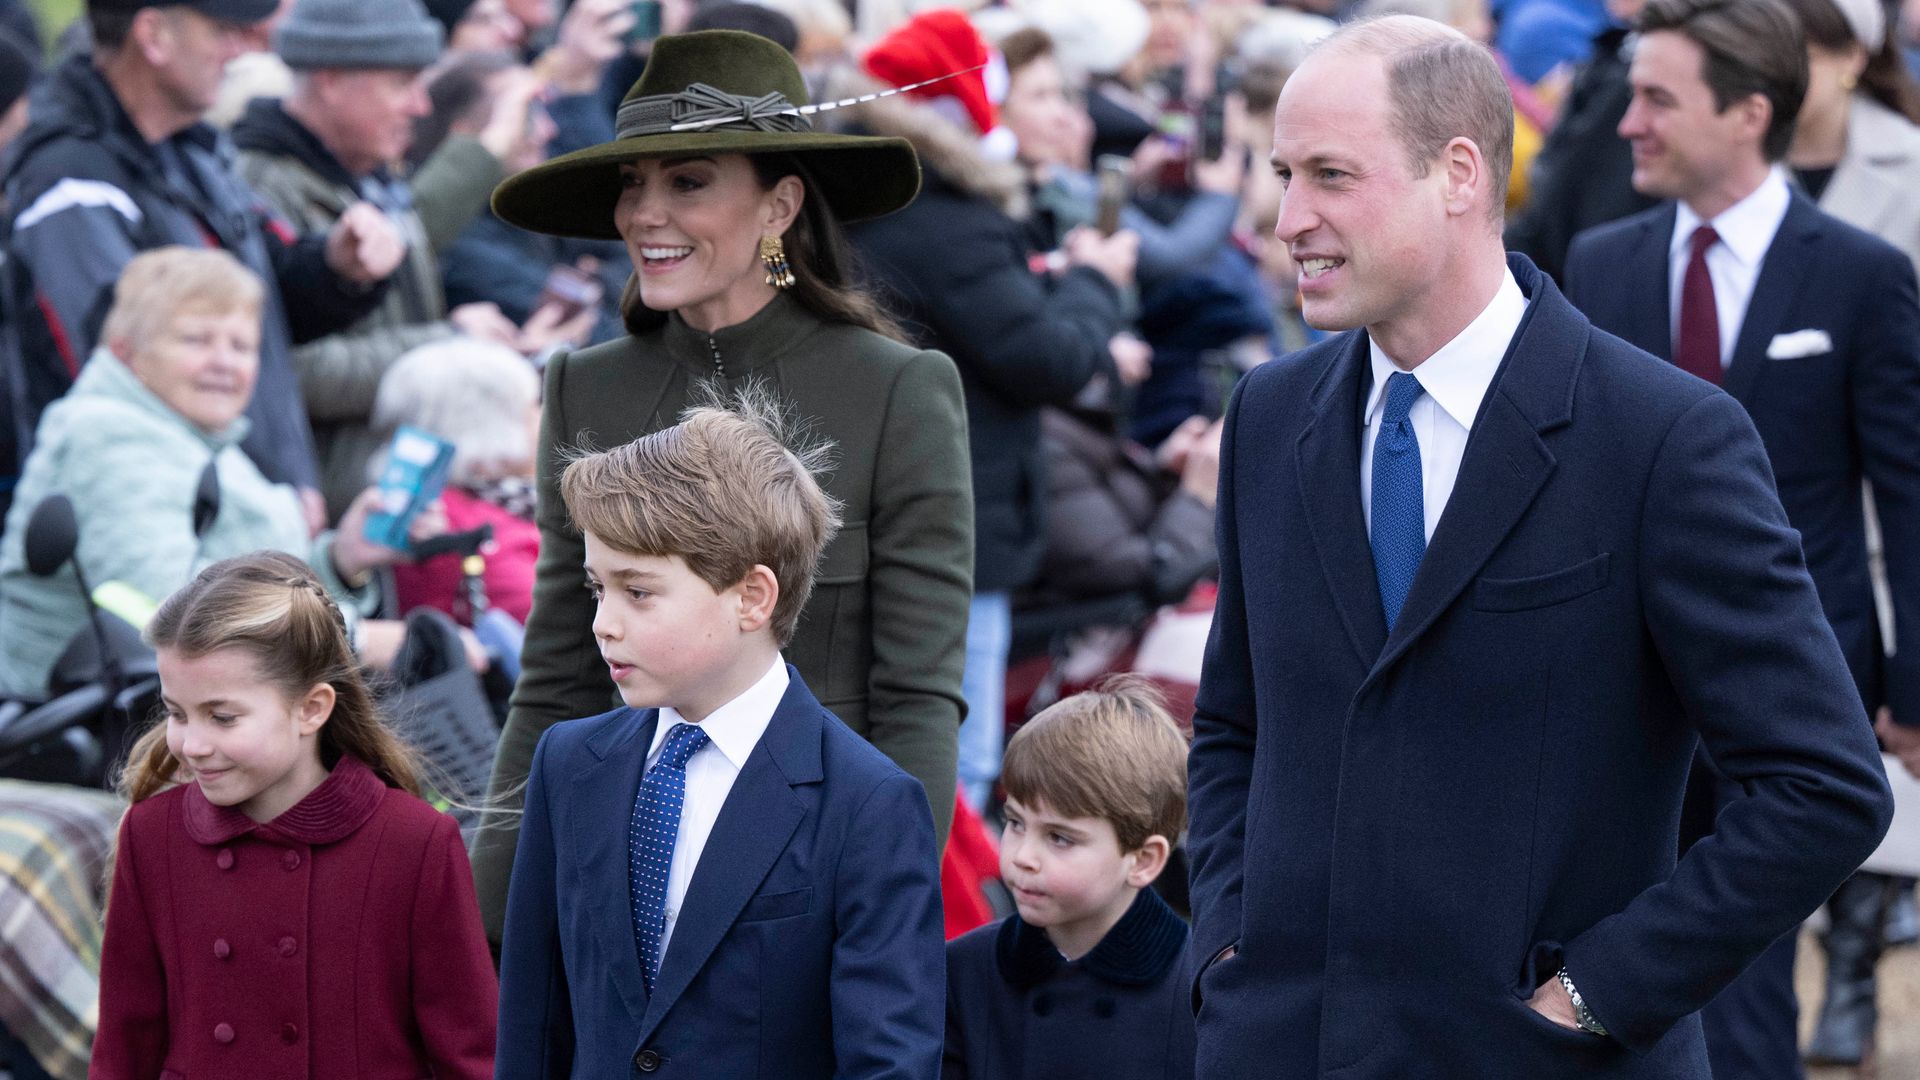 Kate Middleton and Prince William walking with Princess Charlotte, Prince George and Prince Louis